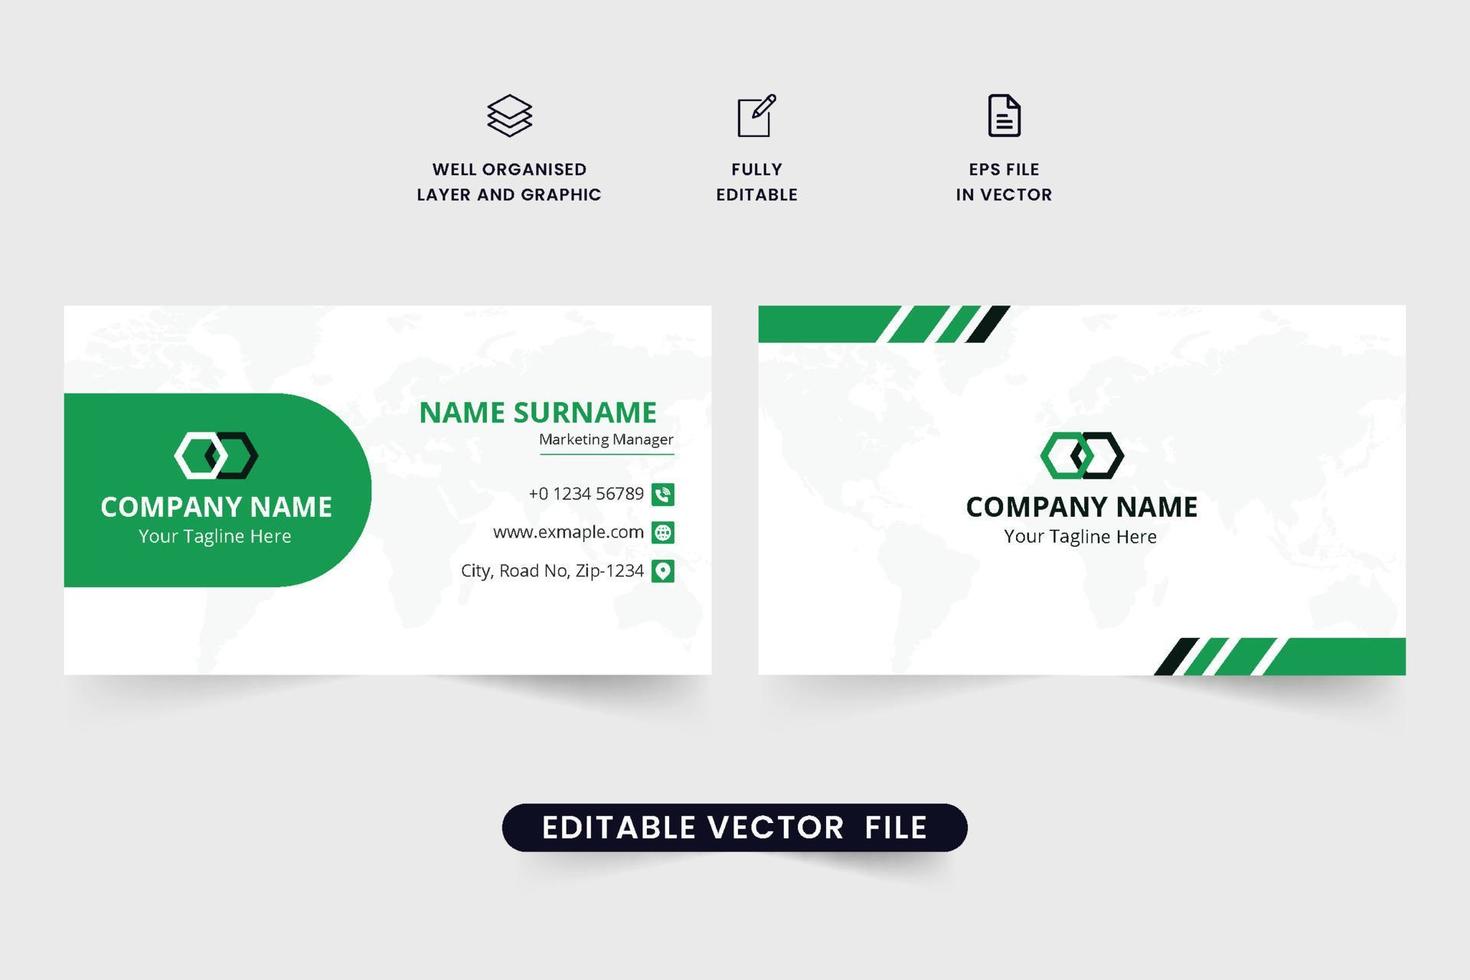 Creative business card stationery template vector with geometric shapes. Professional business card template design with green and dark colors. Modern corporate business branding card vector.